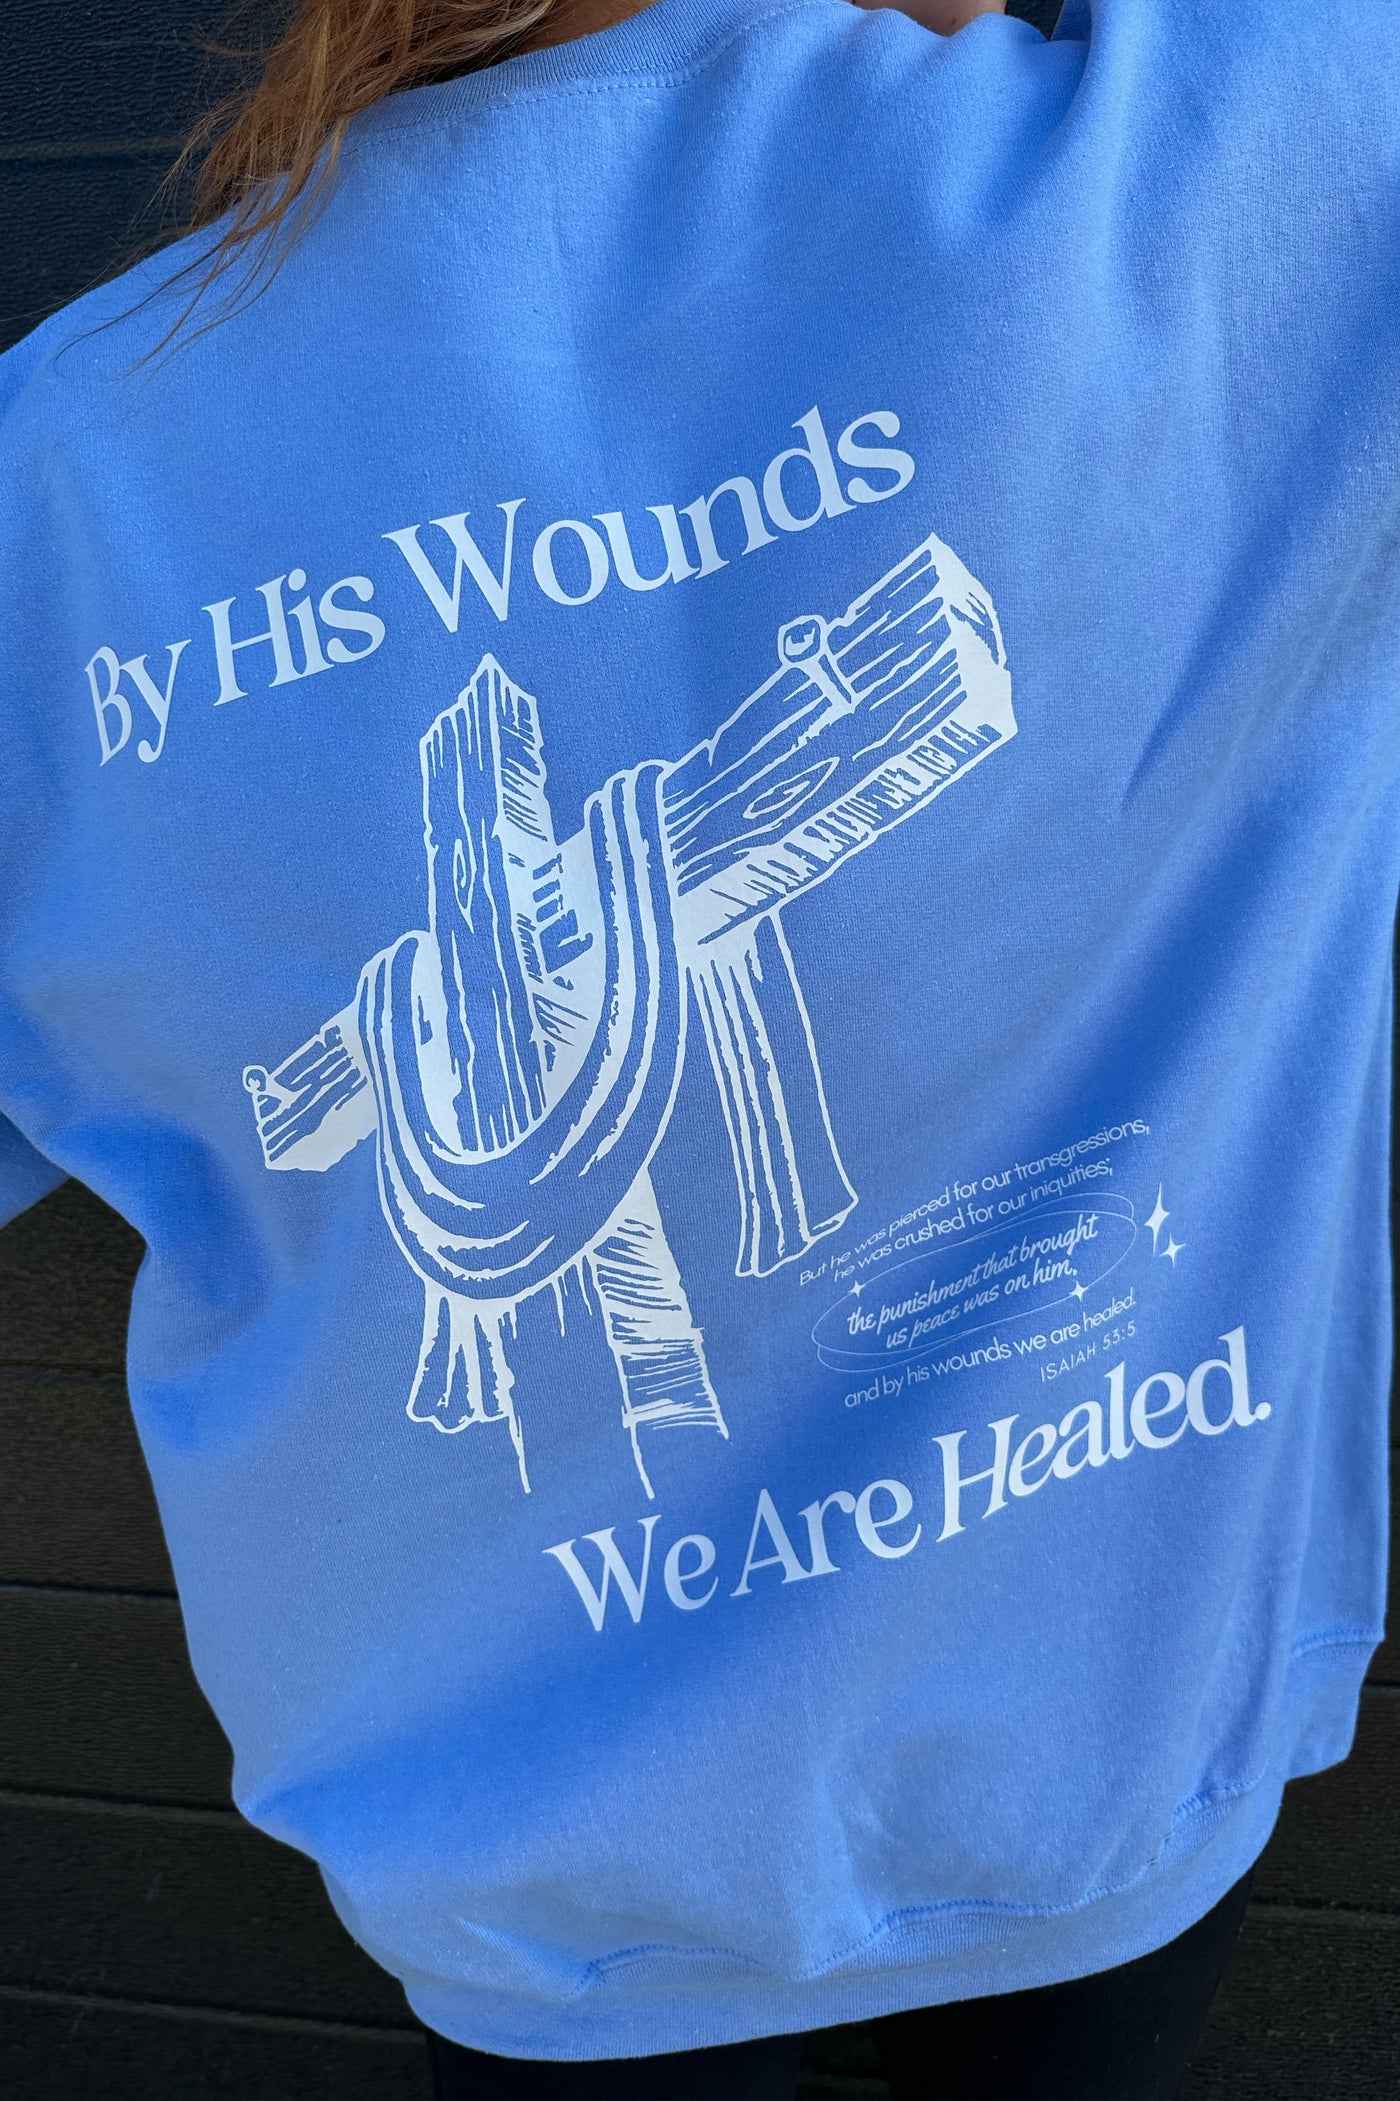 BY HIS WOUNDS WE ARE HEALED